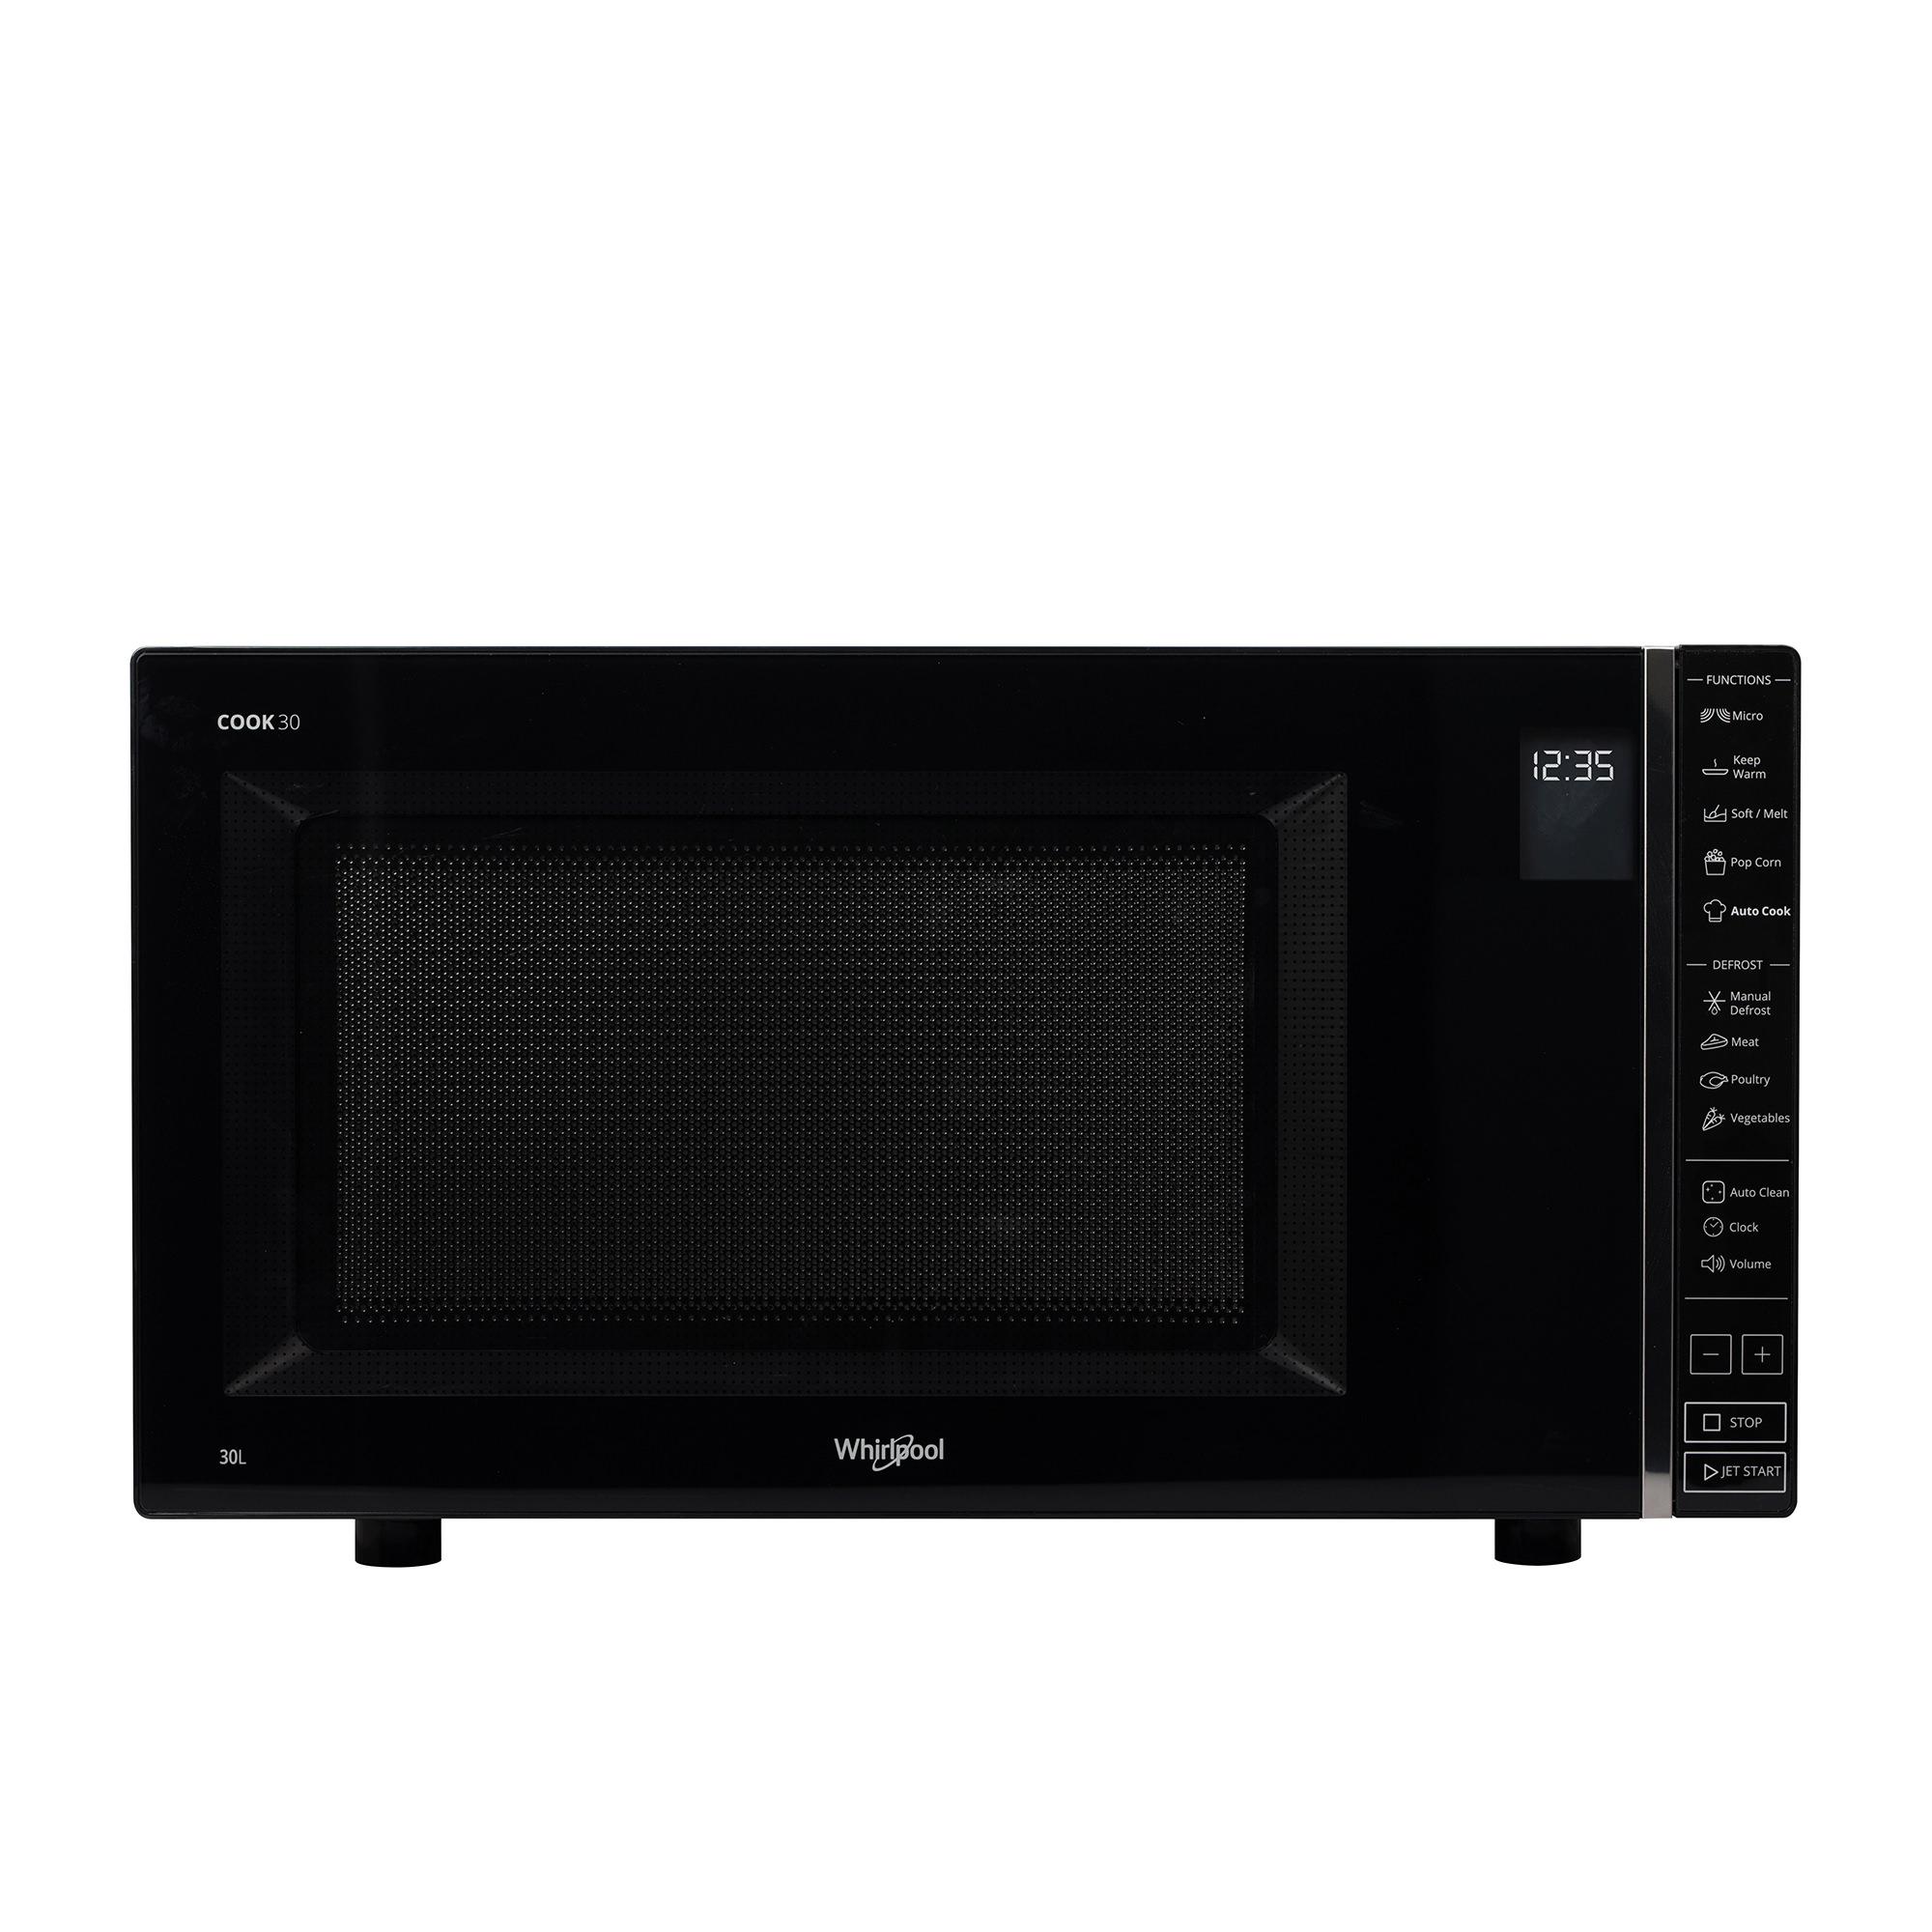 Whirlpool Microwave Oven 30L Black Image 2